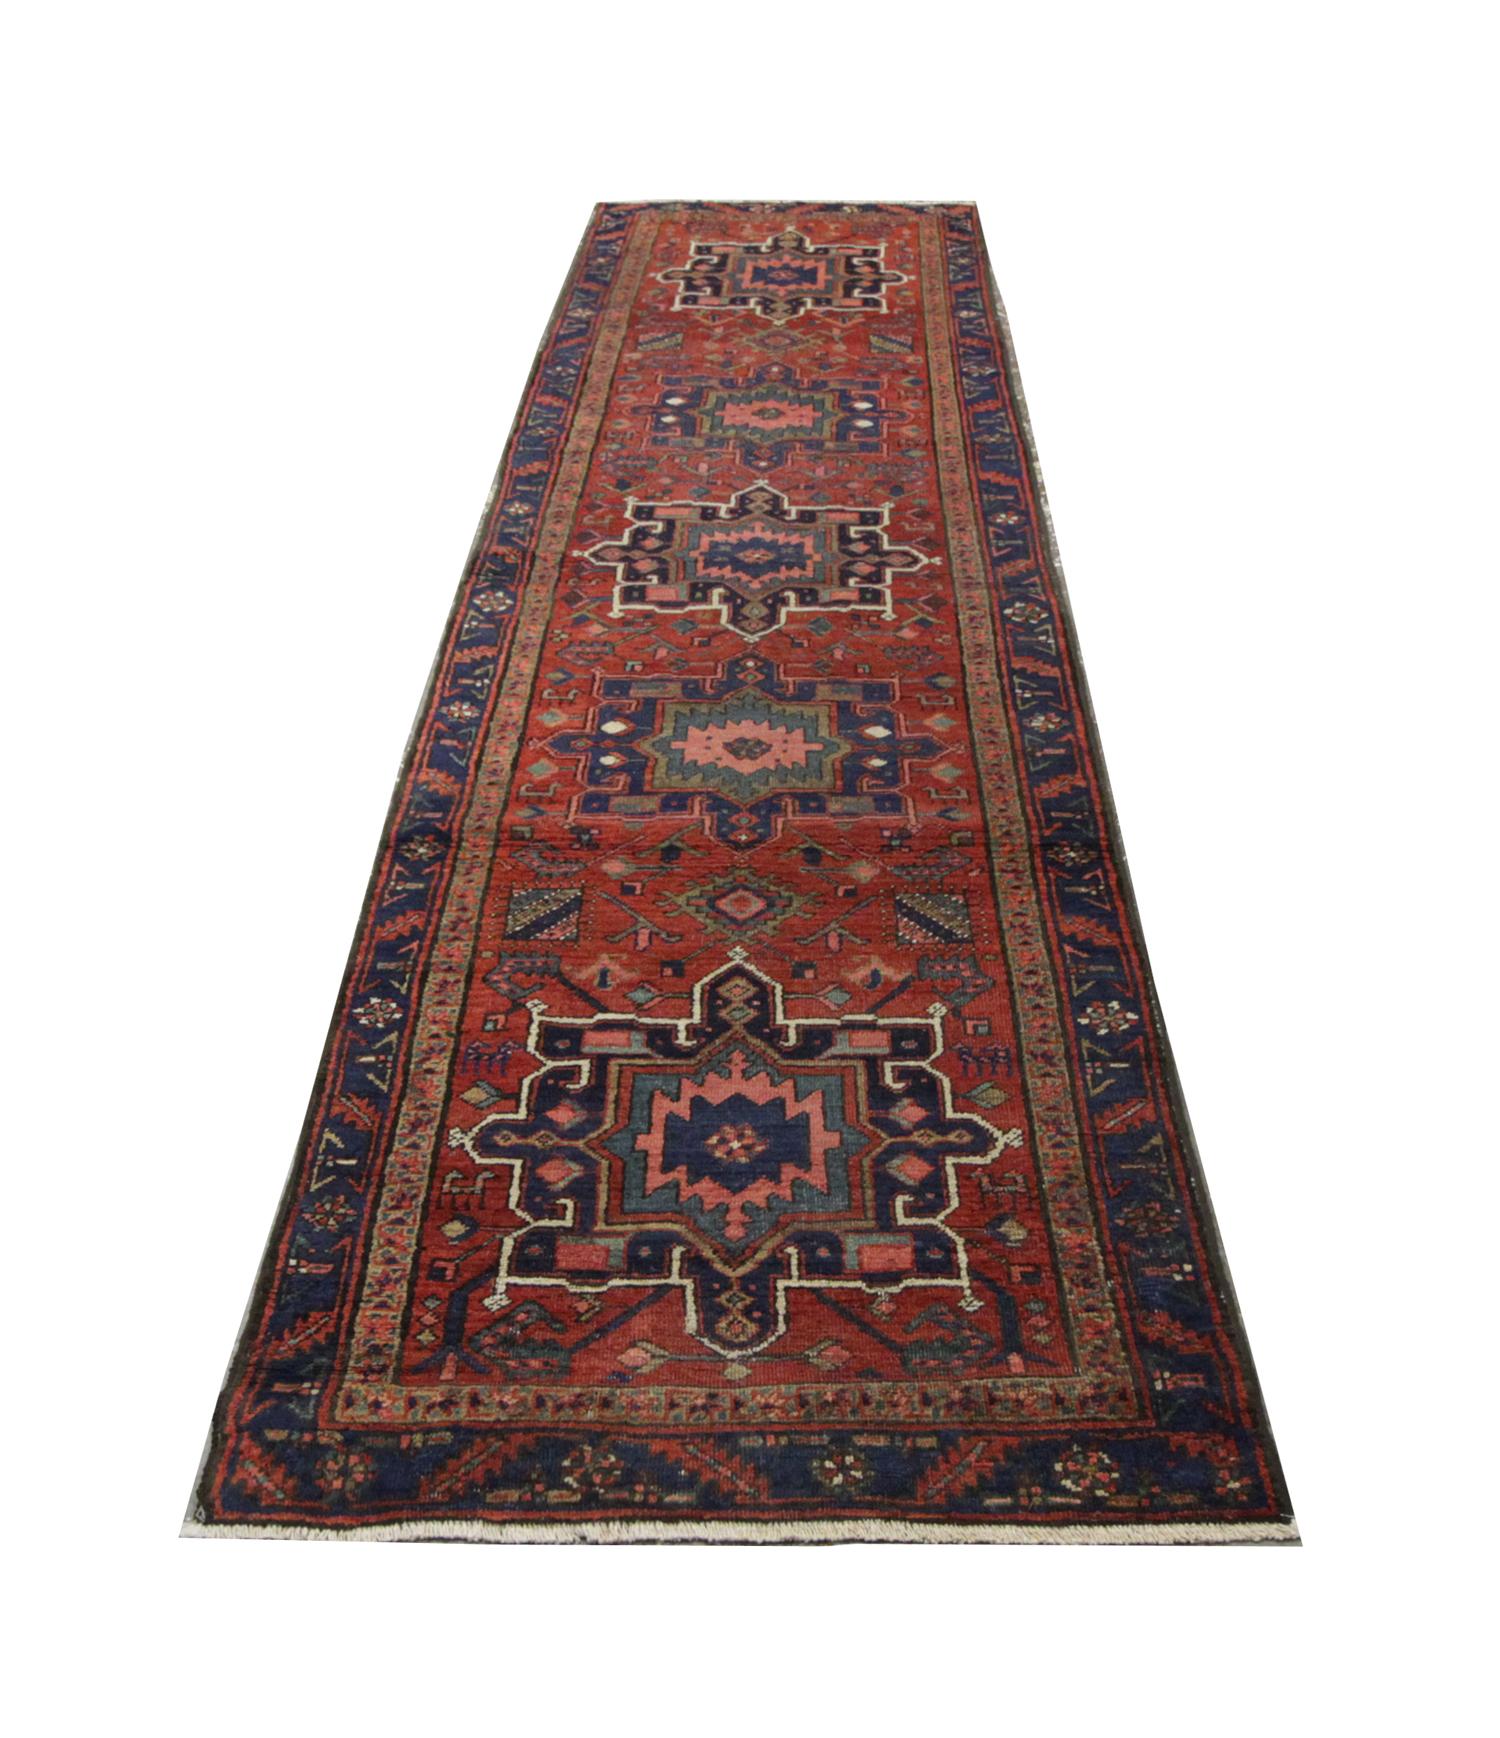 Tribal geometric designs run through the centre of this antique runner rug on a deep red background. A layered border encloses this. The handwoven rustic rug was constructed from handspun wool and cotton. (Antique Rustic Runner Rug 405x97)
